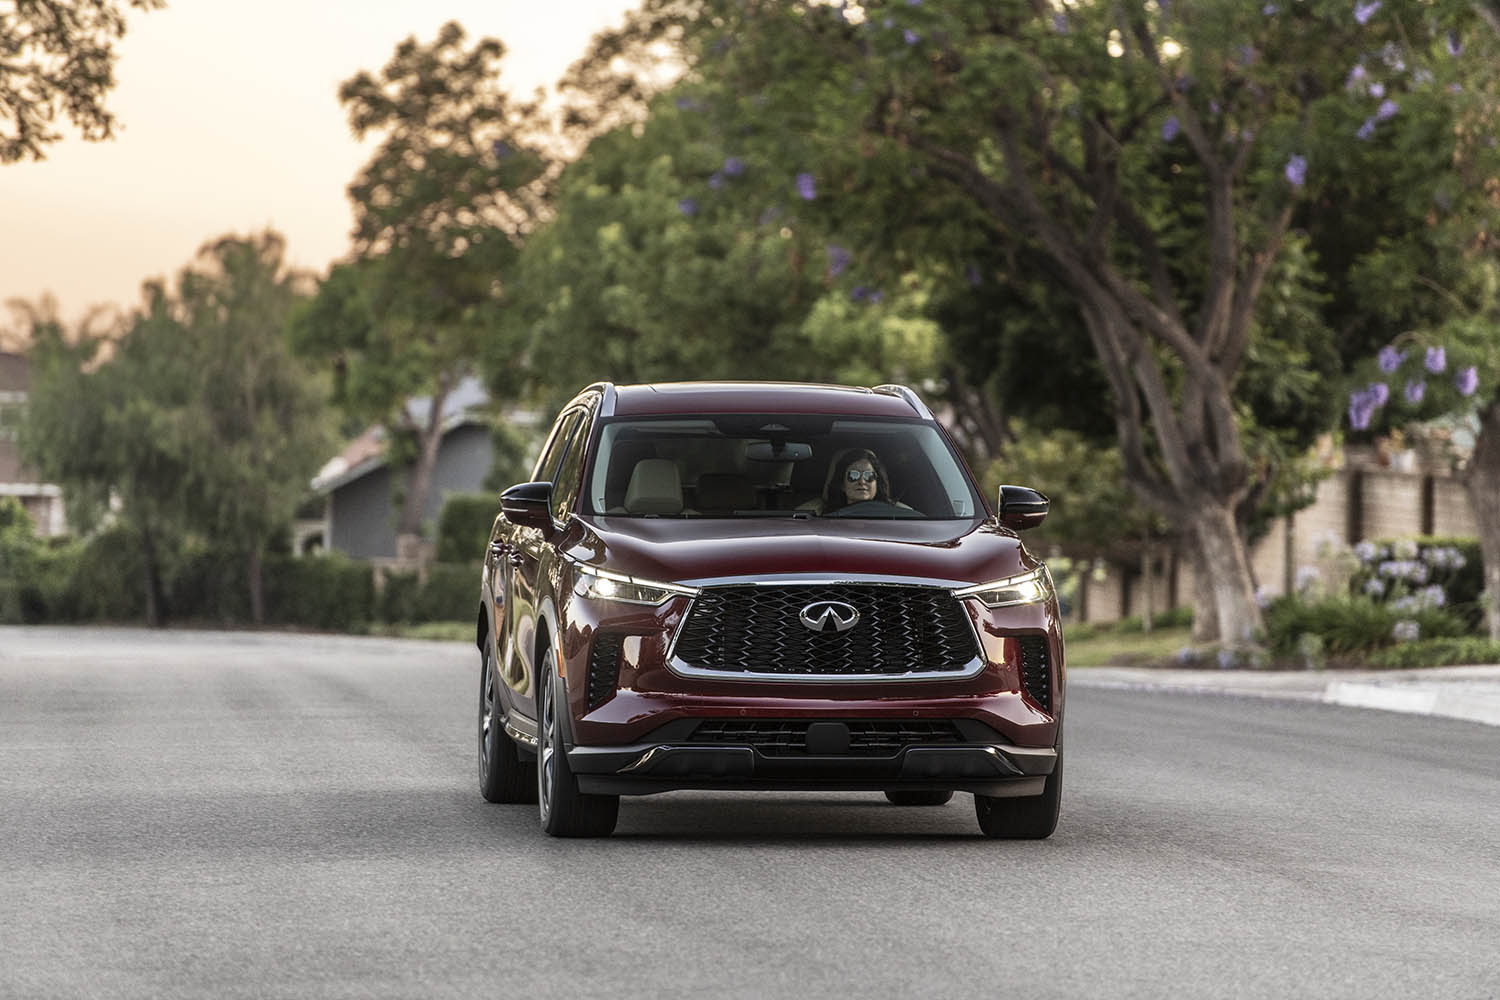 2023 Infiniti QX60 in dark red driving on a residential street